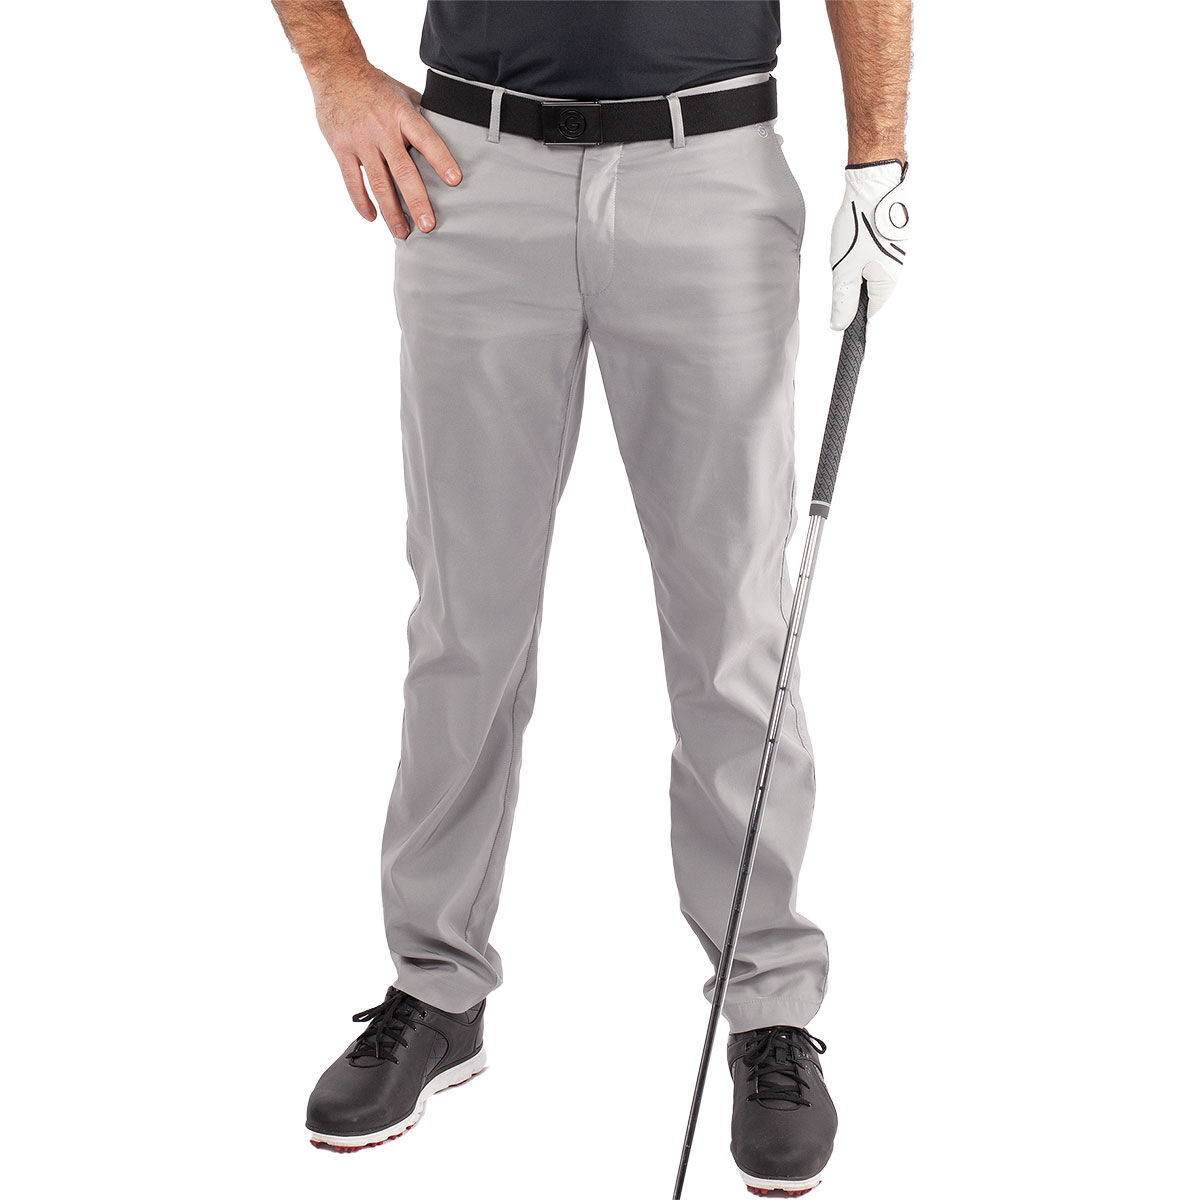 Galvin Green Angie Paclite Trousers Black | Waterproofs at JamGolf